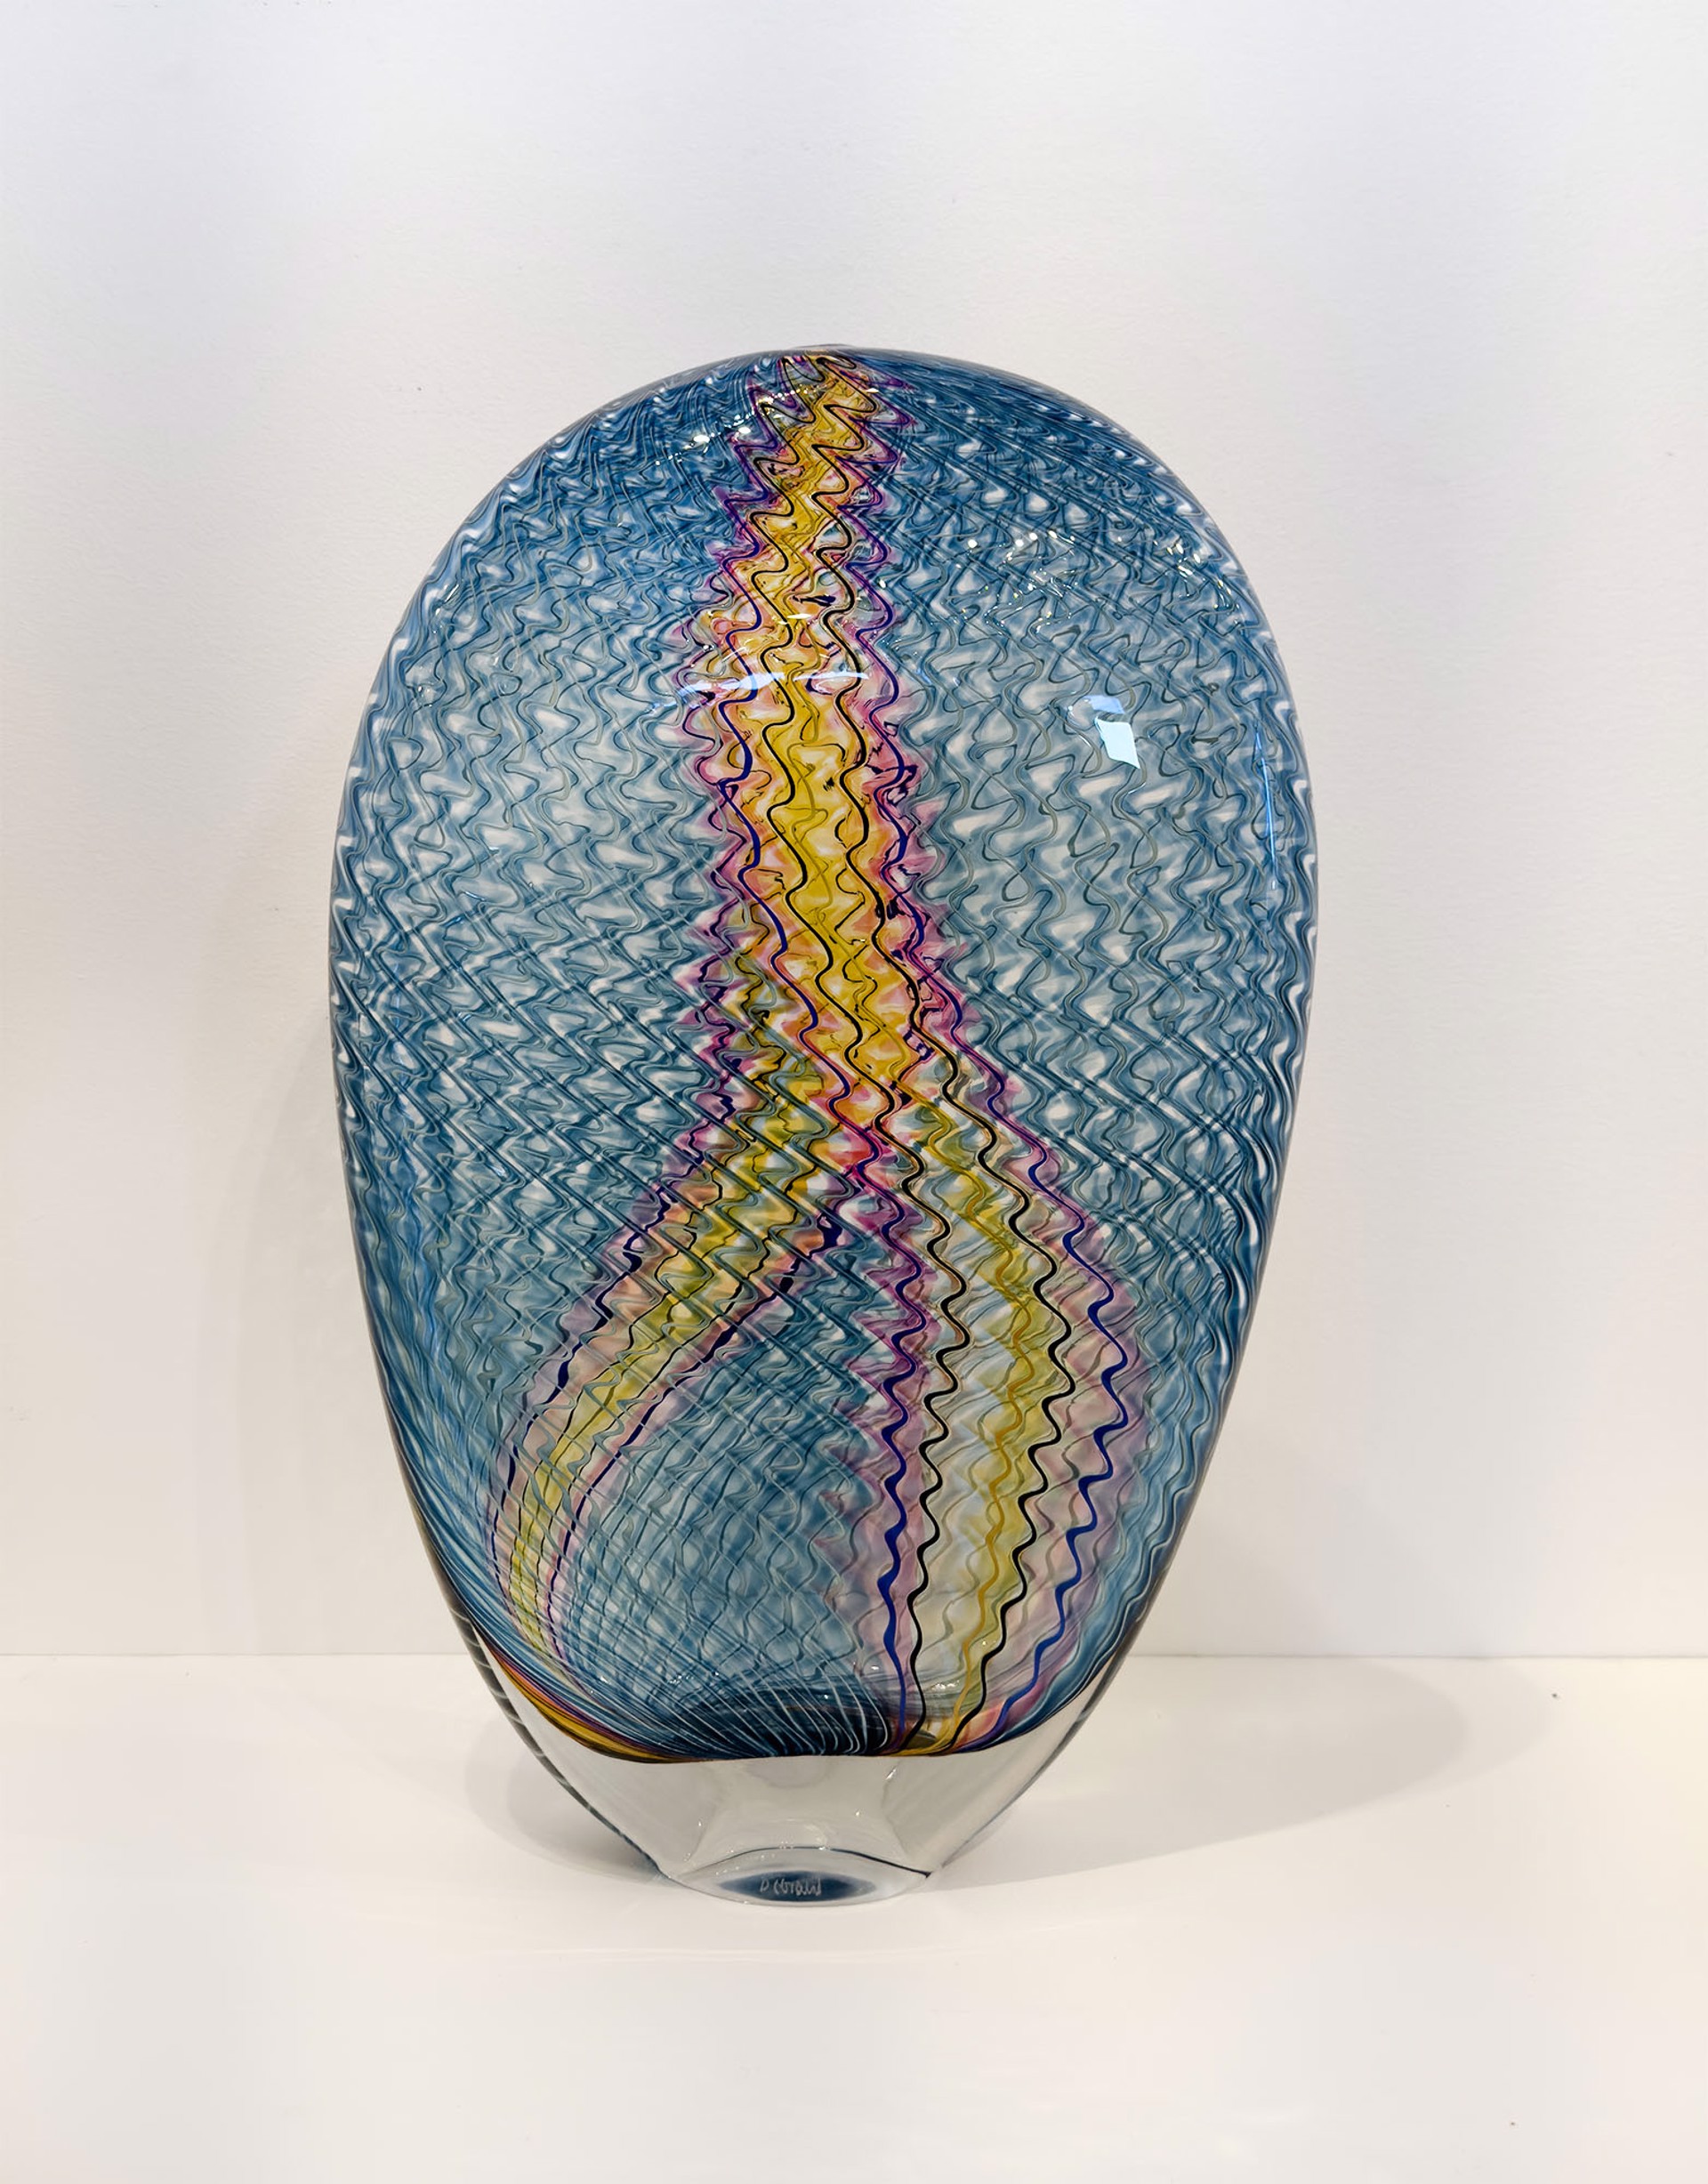 Original Hand Blown Glass Sculpture By Dan Friday Featuring A Rounded Vessel With Blue Pink And Yellow Lightning Pattern Motifs